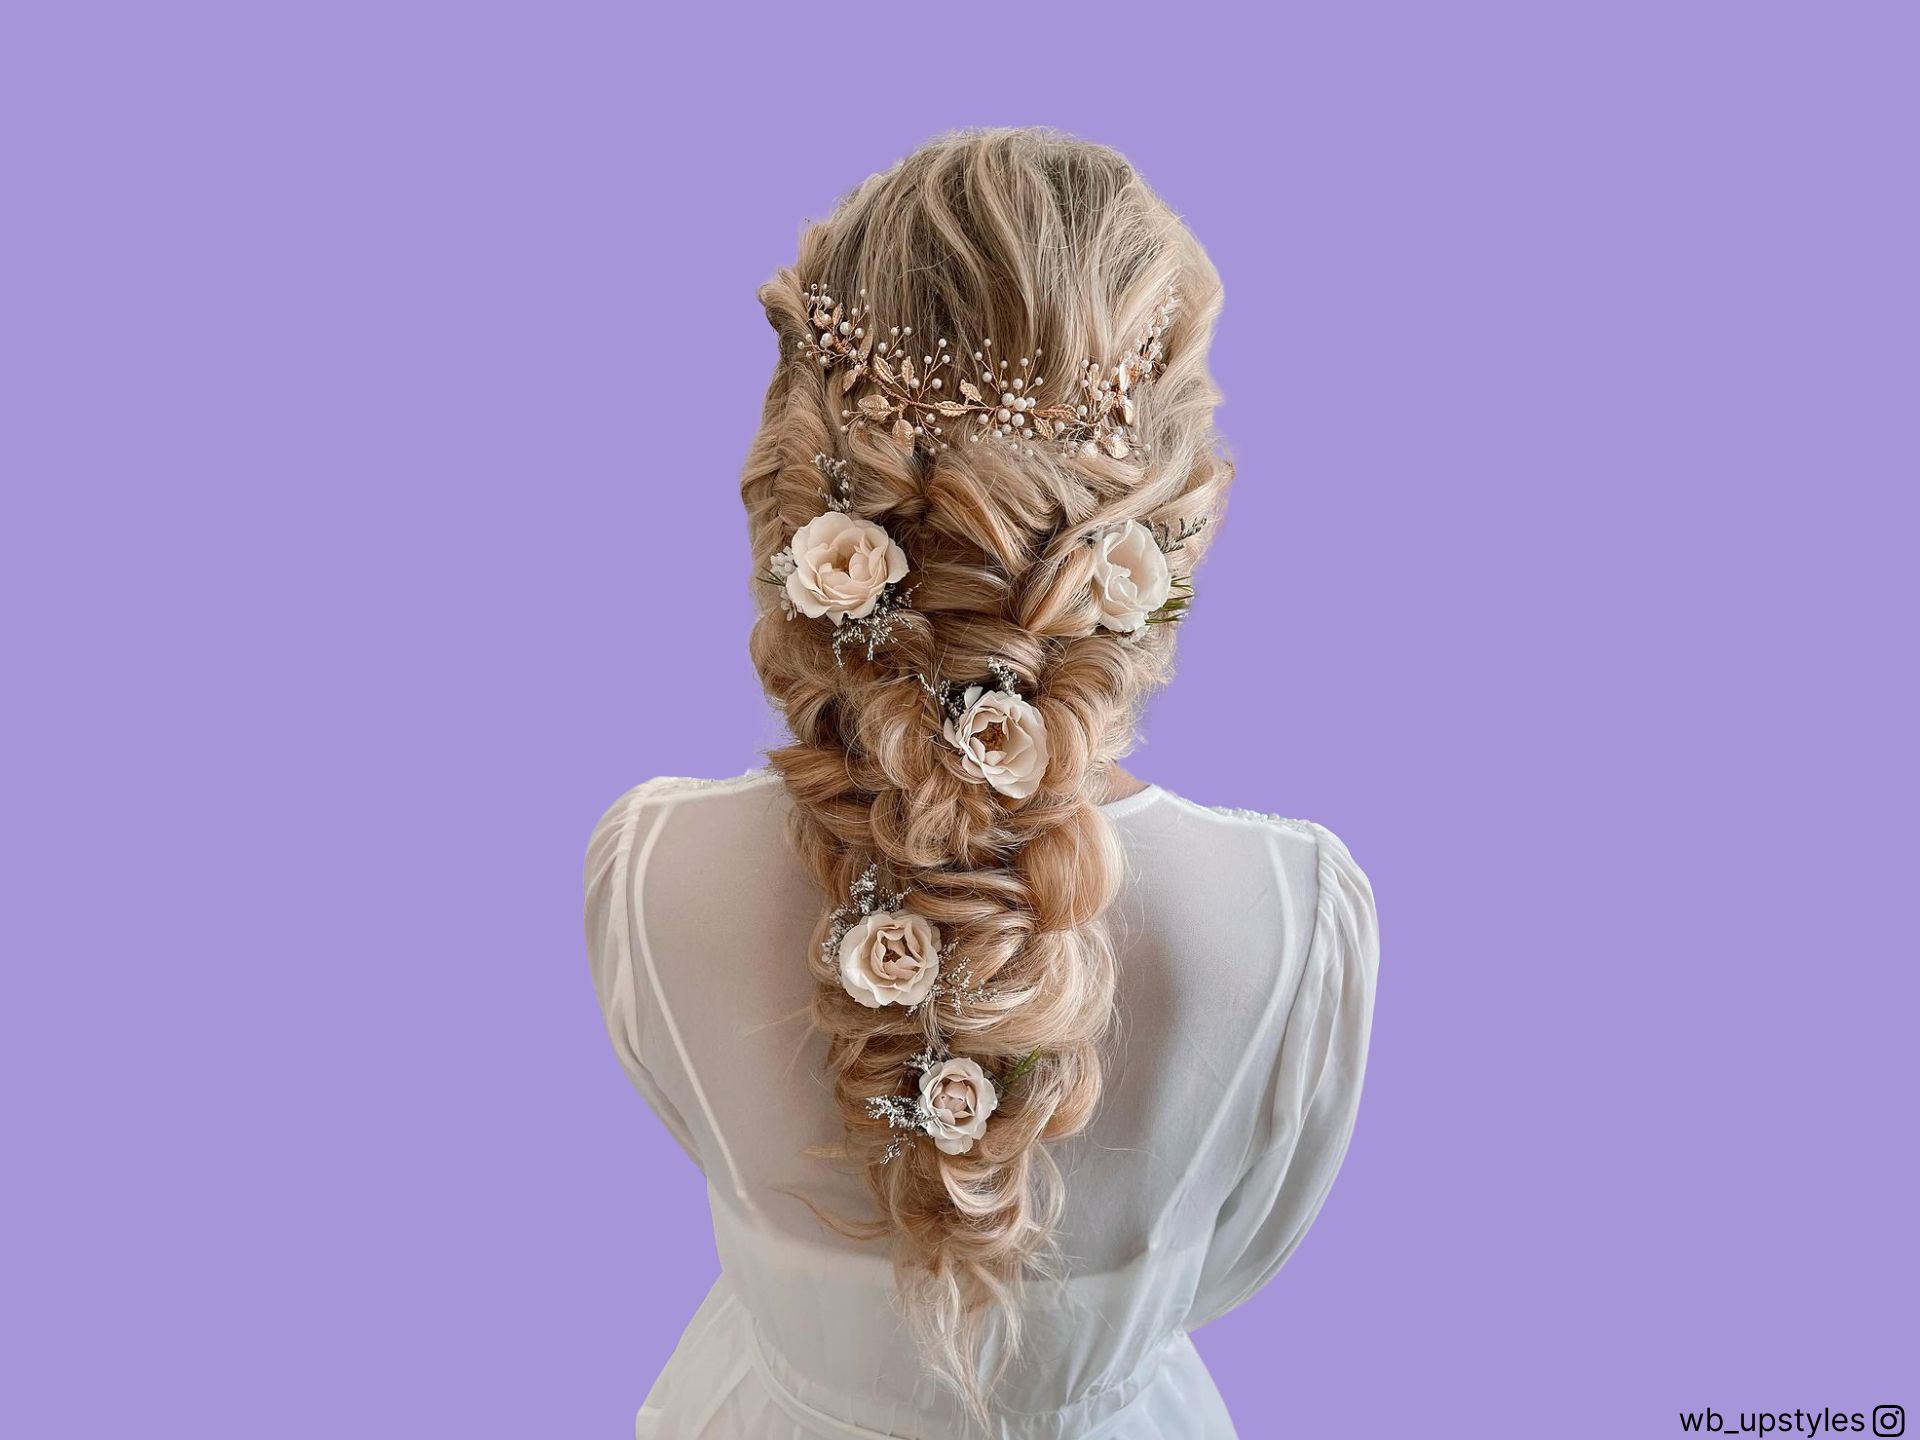 Get Ready To Walk Down The Aisle With These 24 Trendy Wedding Hairstyles